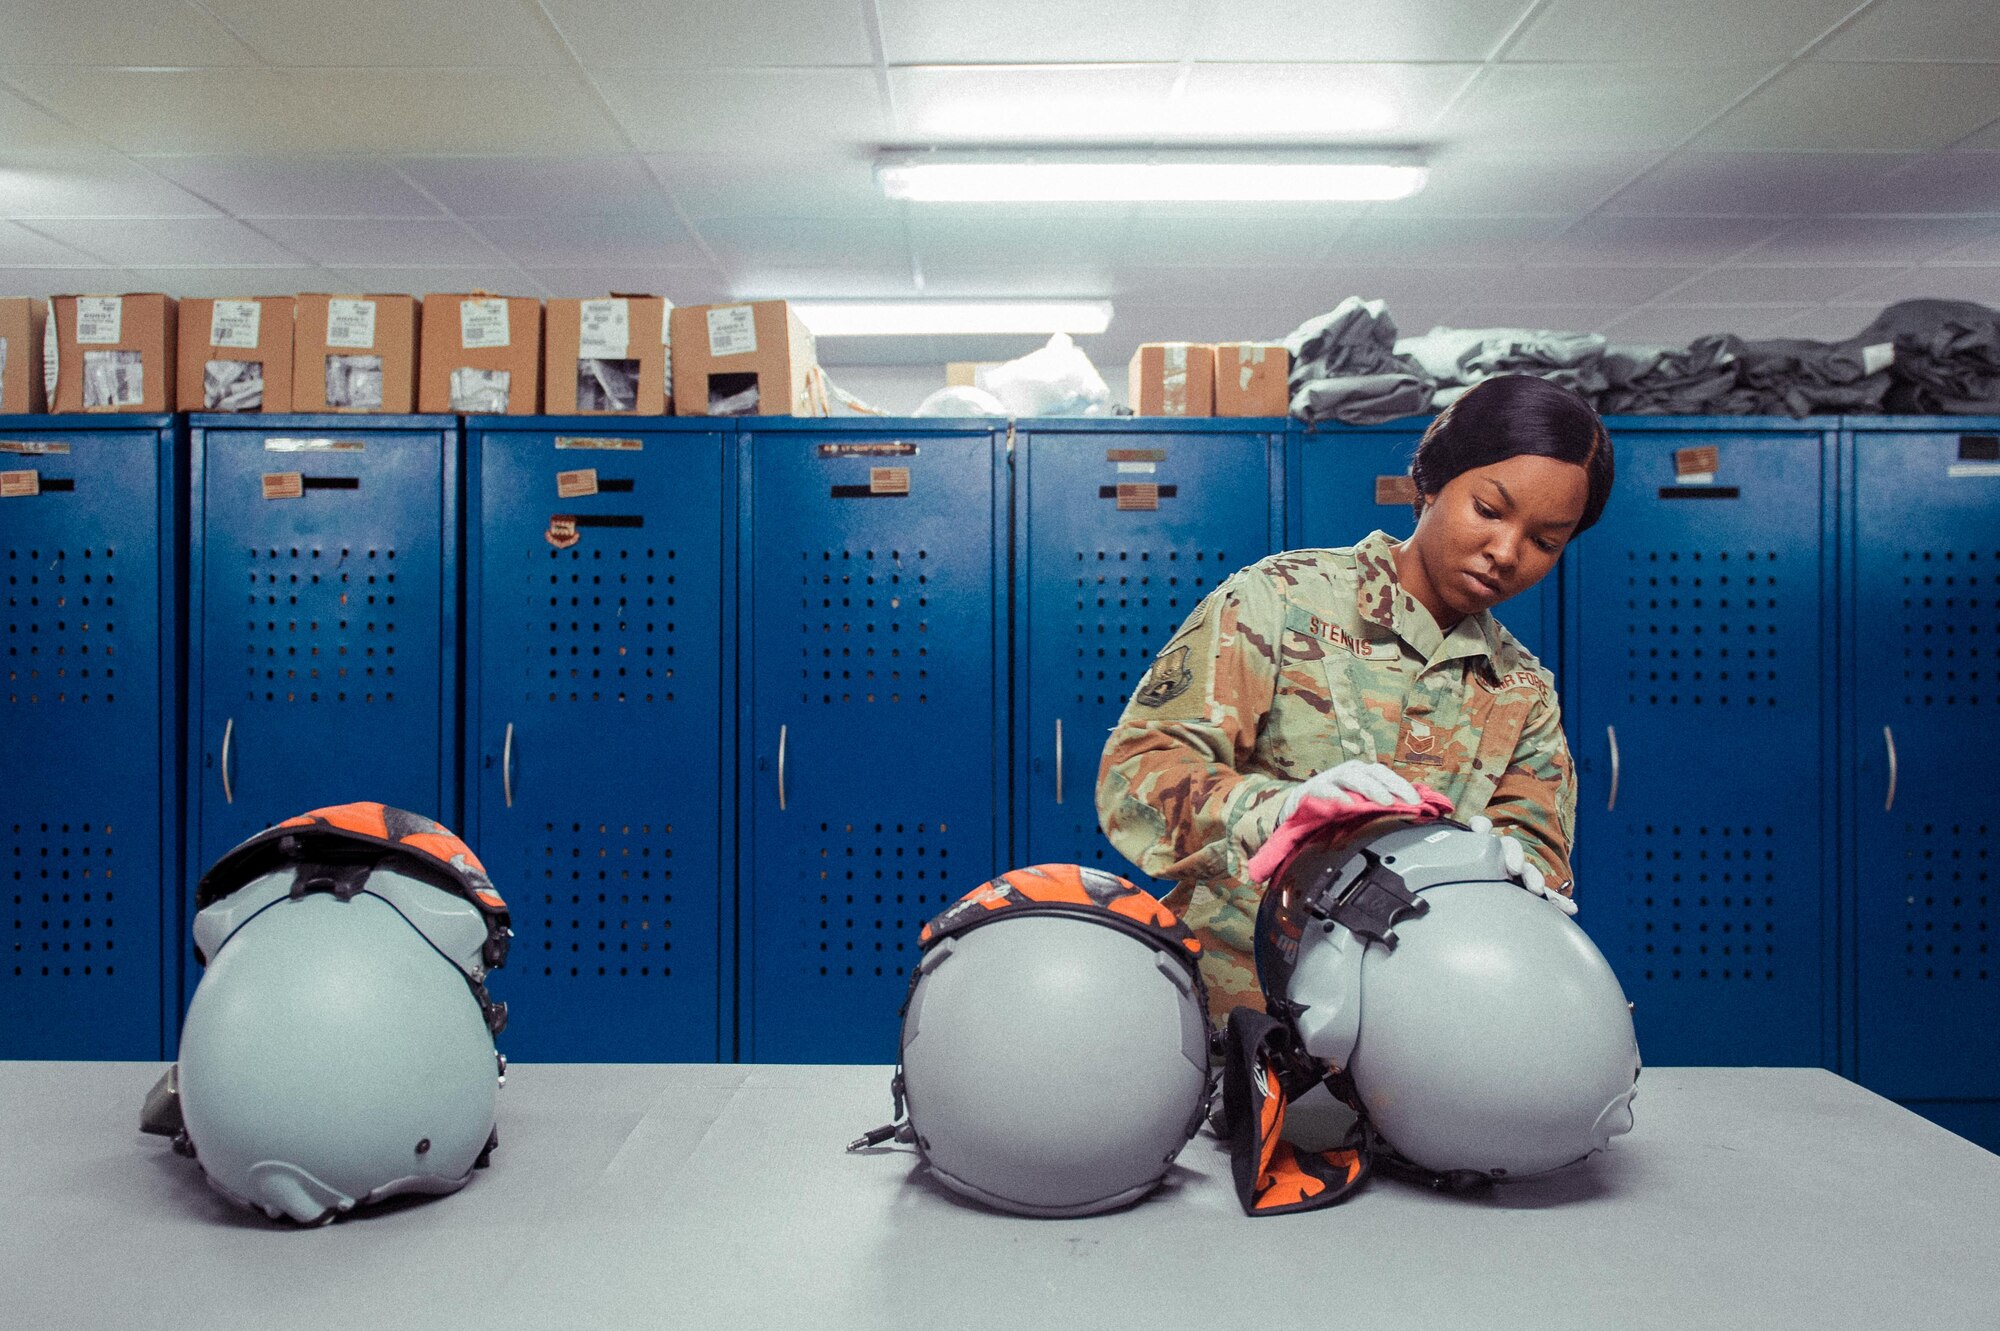 U.S. Air Force Staff Sgt. Kayla Stennis, 391st Expeditionary Fighter Squadron aircrew flight equipment craftsman, cleans a helmet visor February 14, 2019 in Southwest Asia. The AFE section ensures all the life support equipment is ready to meet the demands of the mission. (U.S. Air Force photo by Staff Sgt. Delano Scott)